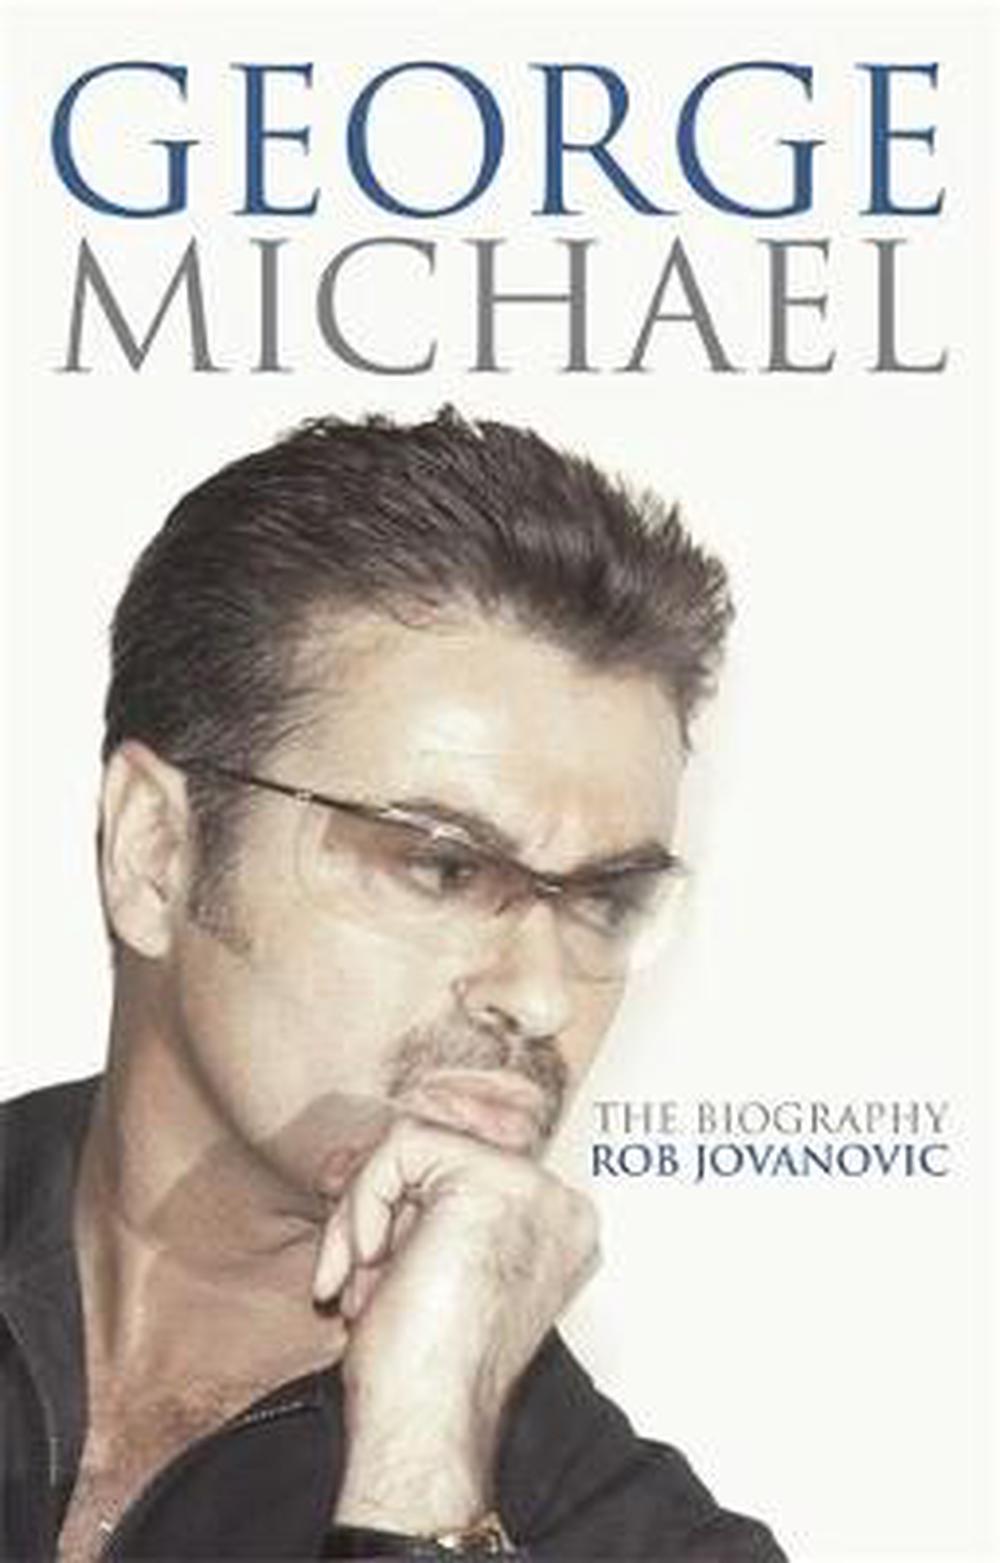 biography of george michael